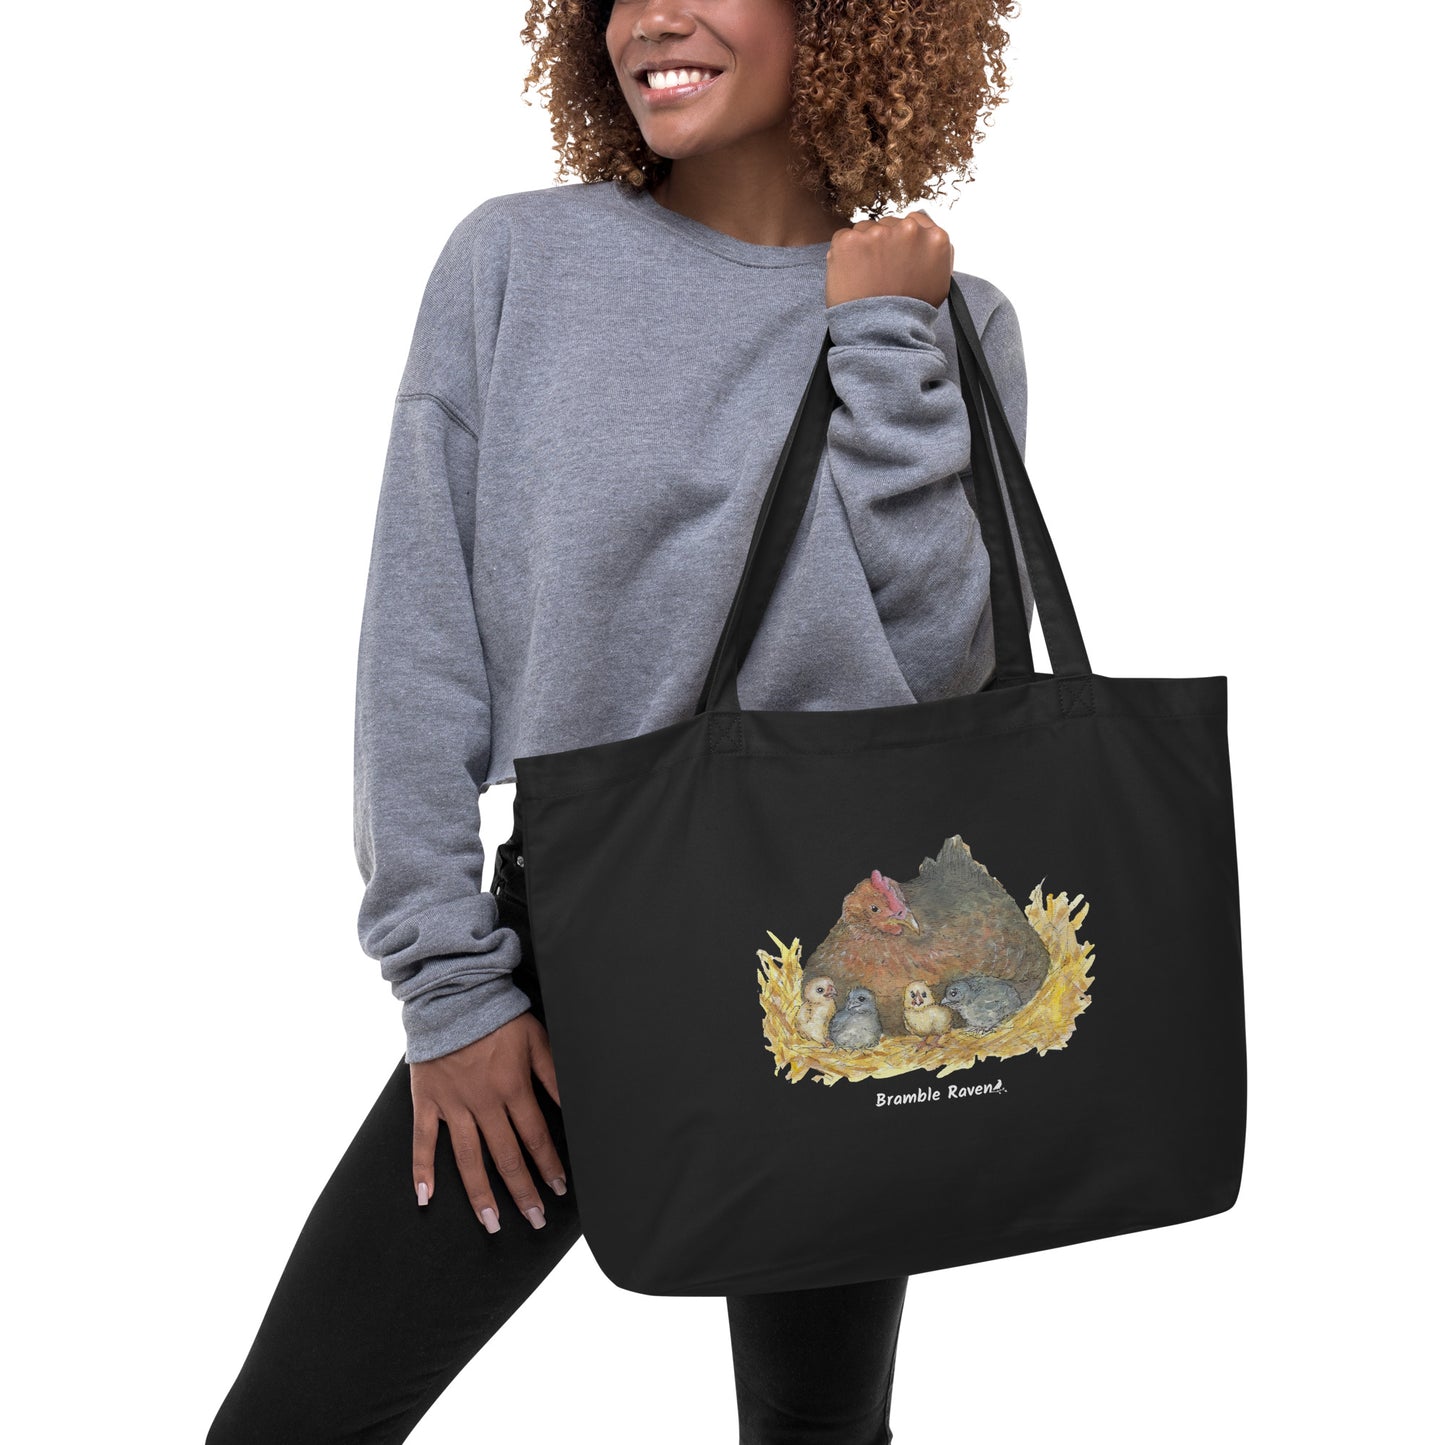 Large black organic cotton tote bag. Has a watercolor mother hand and chicks print. Holds up to 30 pounds. Shown being held by female model.